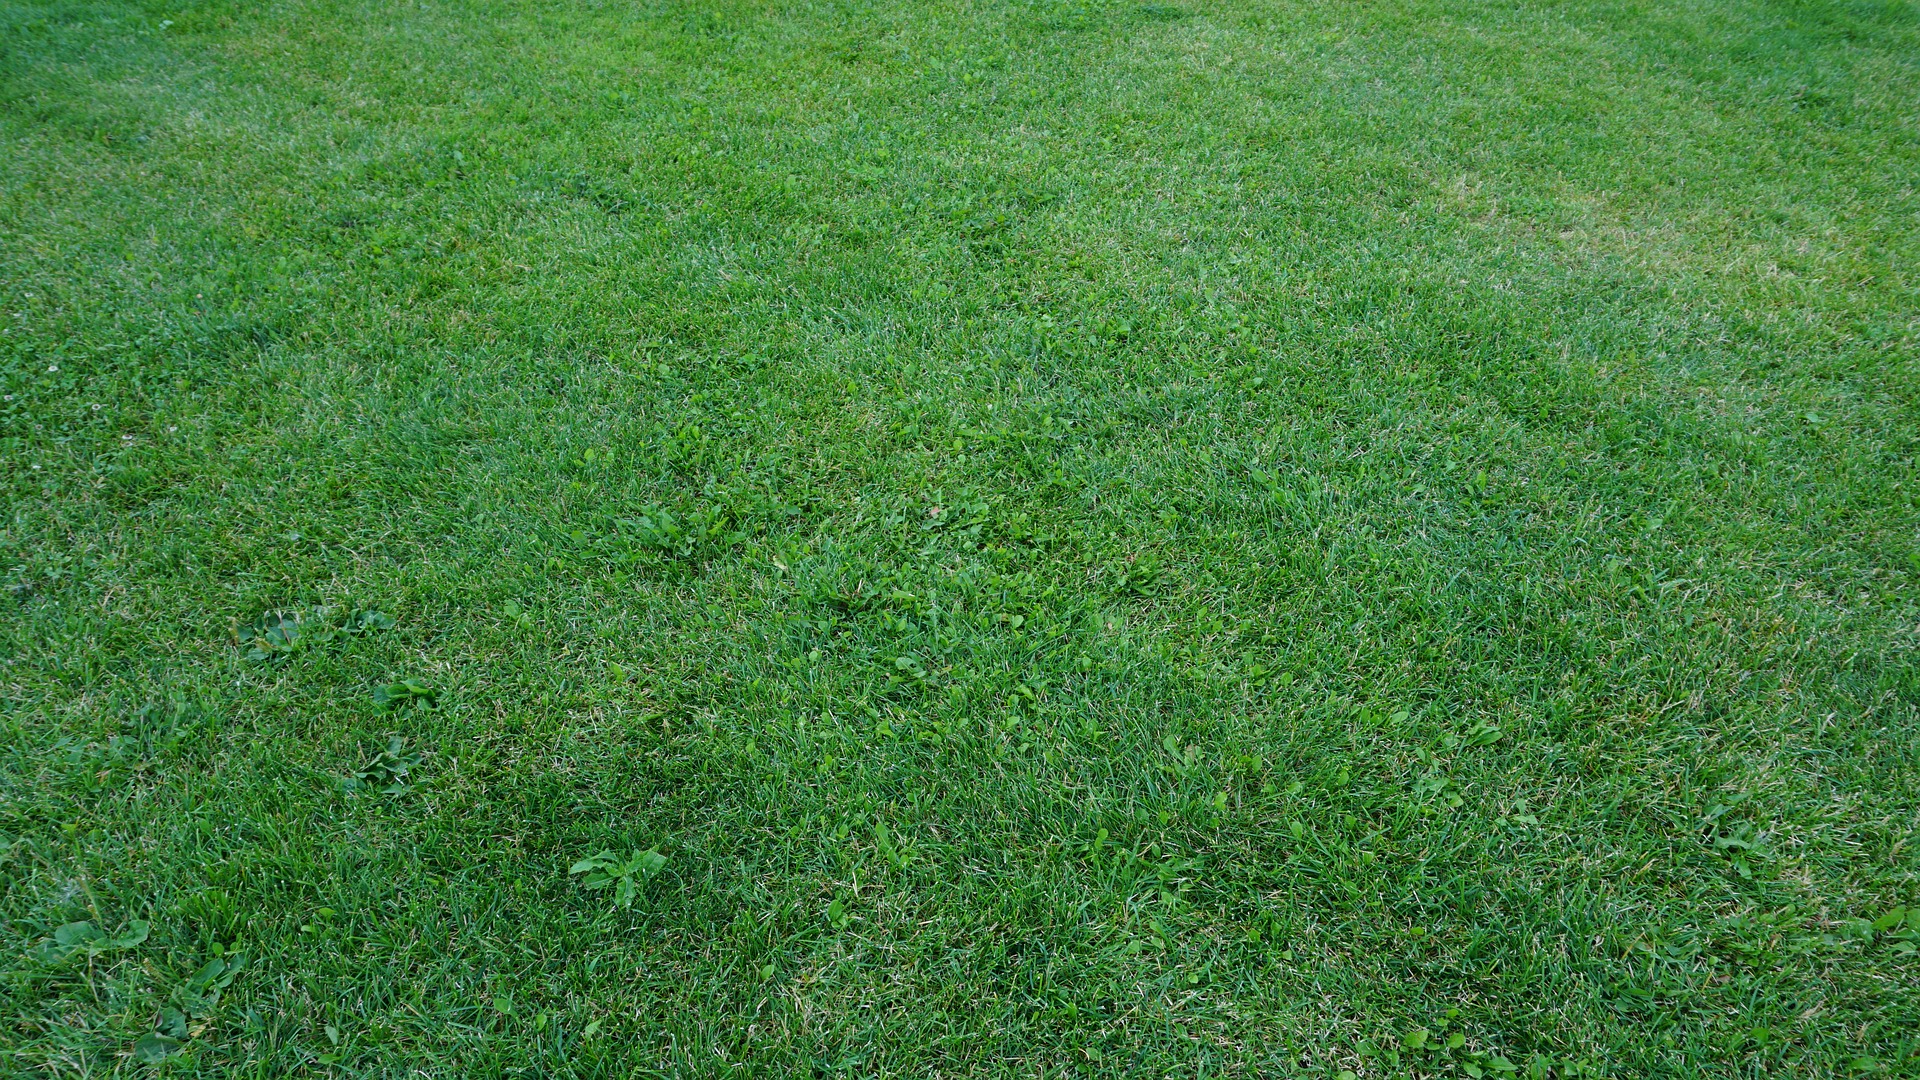 well-trimmed turf